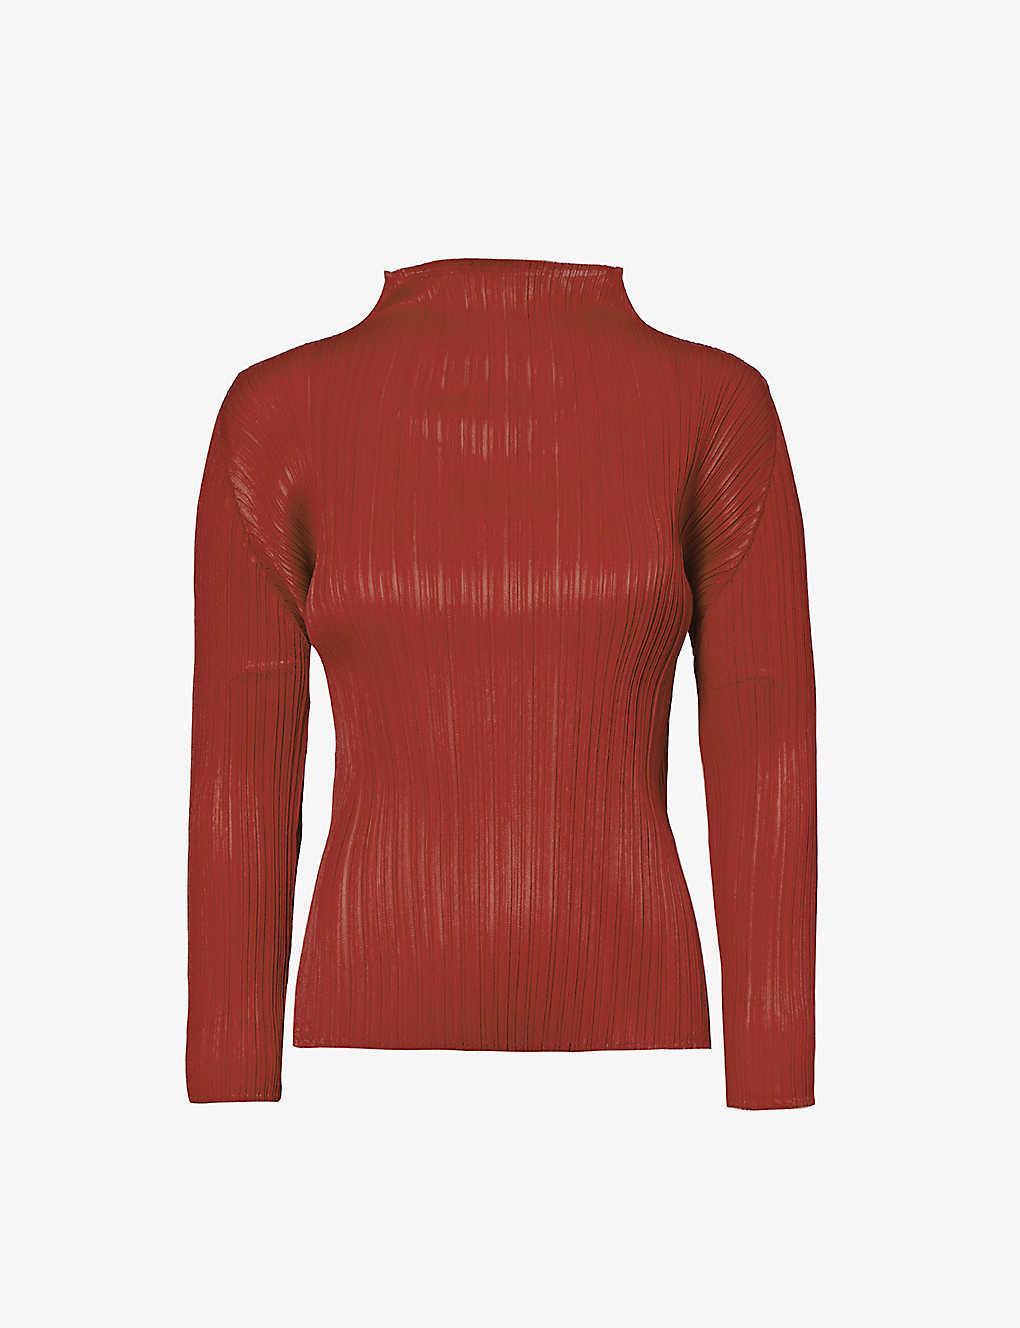 Issey Miyake Pleats Please  Womens Red Colourful High-neck Knitted Top